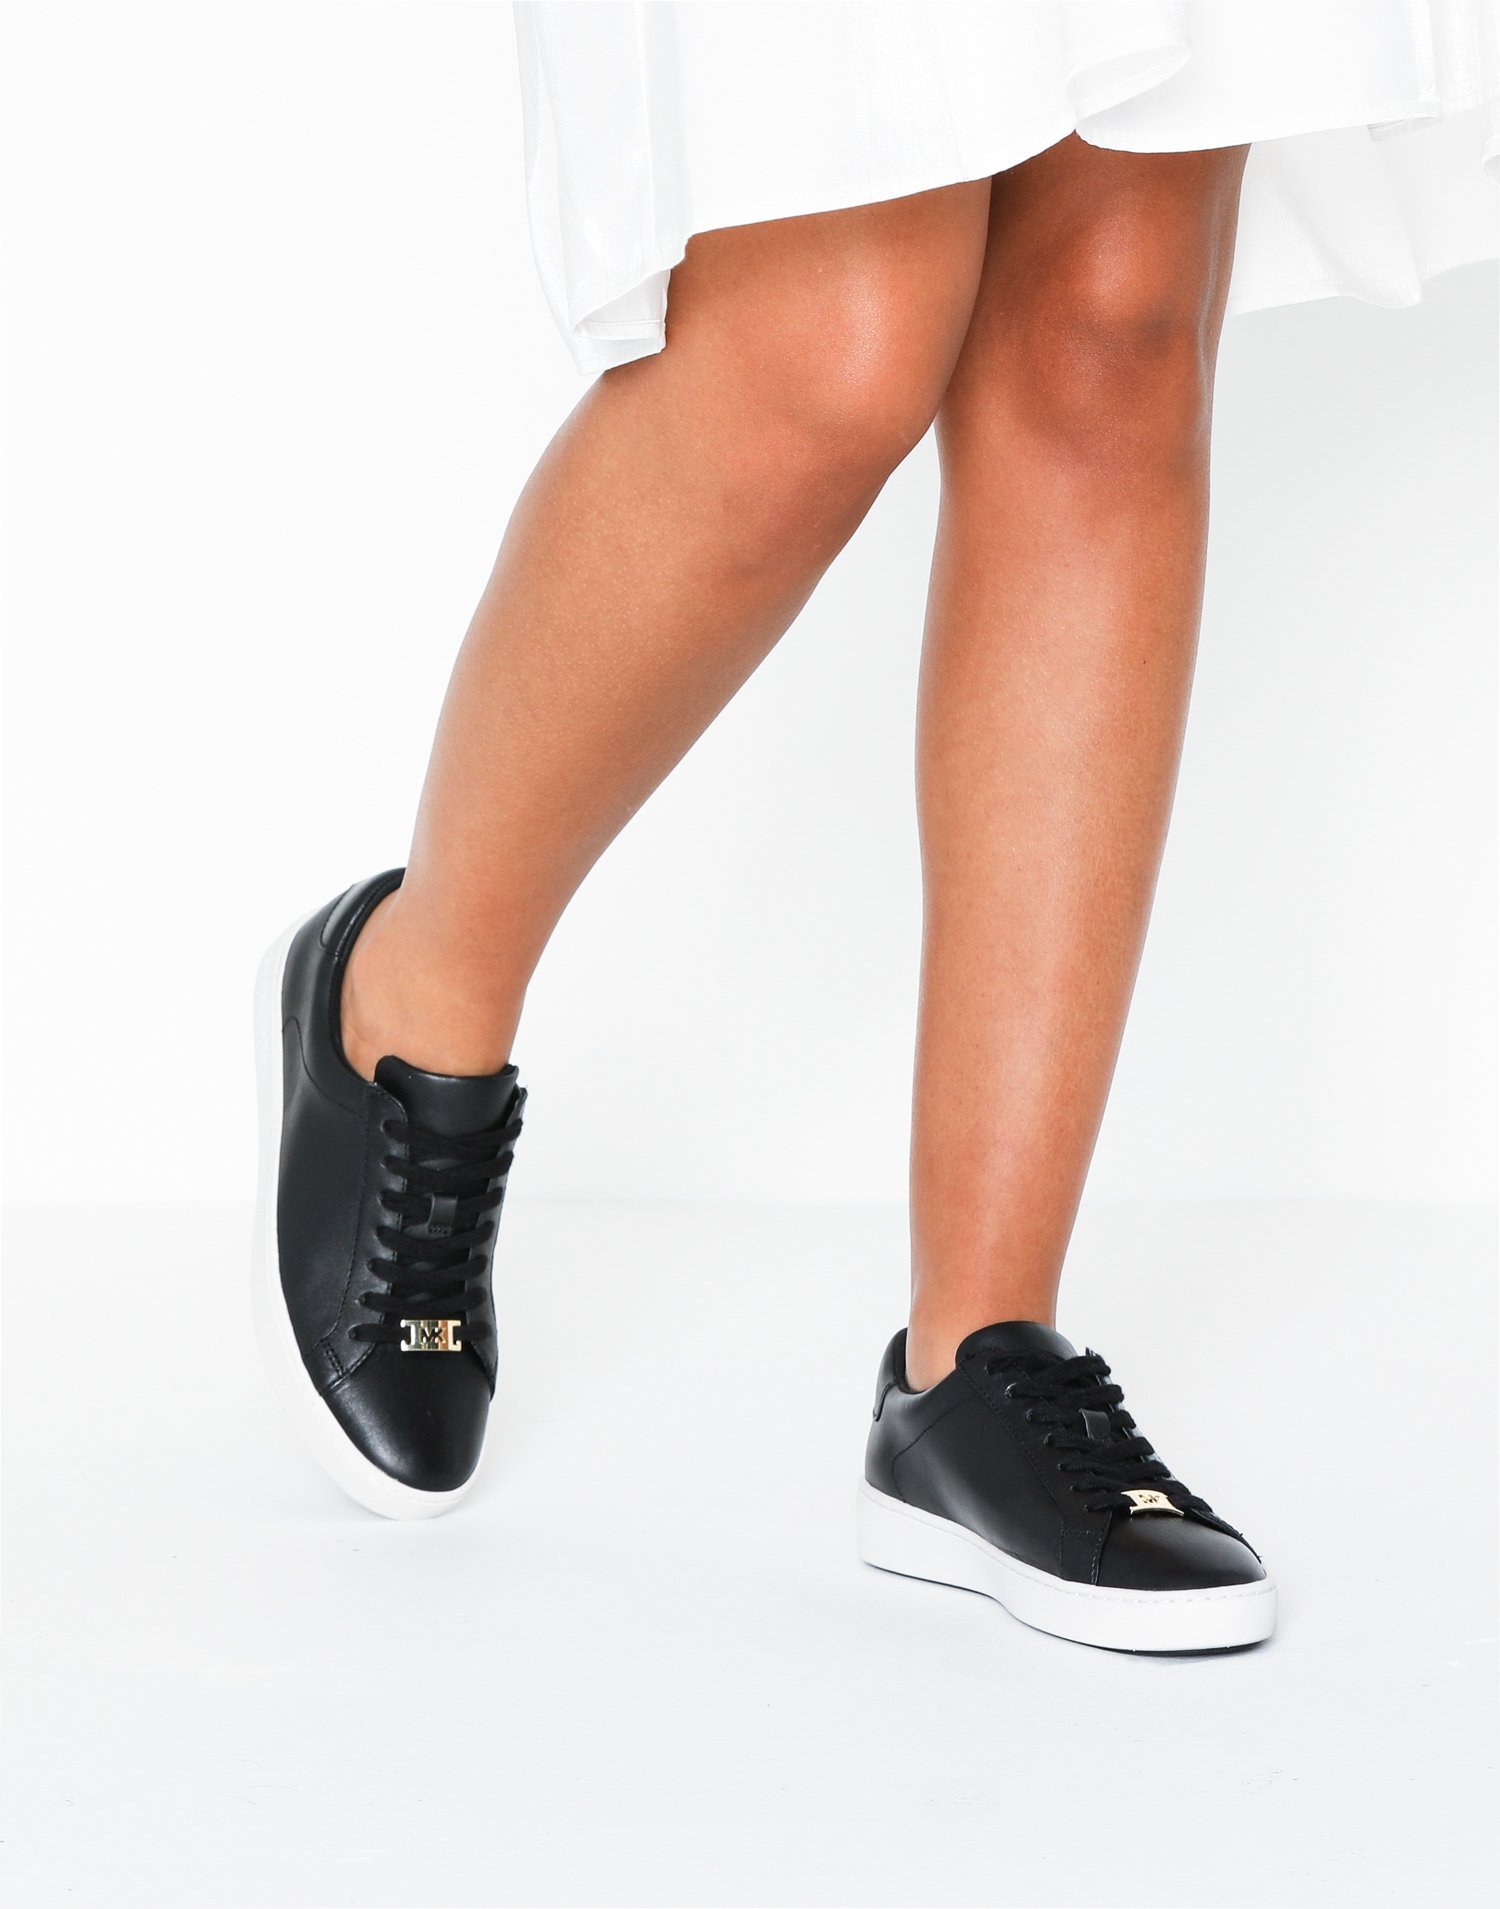 michael kors irving lace up sneakers